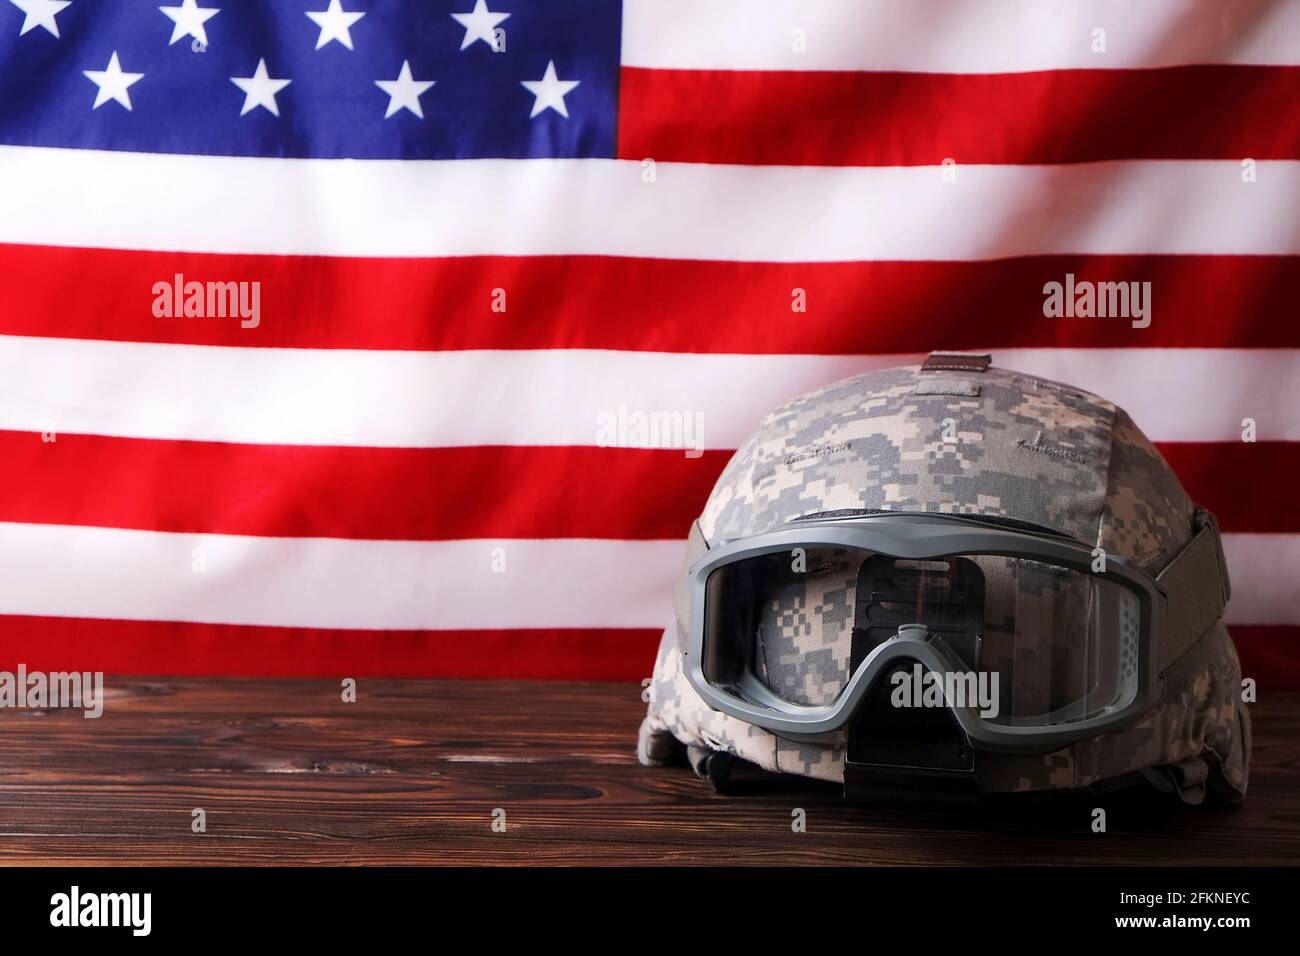 US Army kevlar combat helmet, camo cover, tactical goggles, USA flag background. Memorial weekend, veterans day, United States of America armed forces Stock Photo